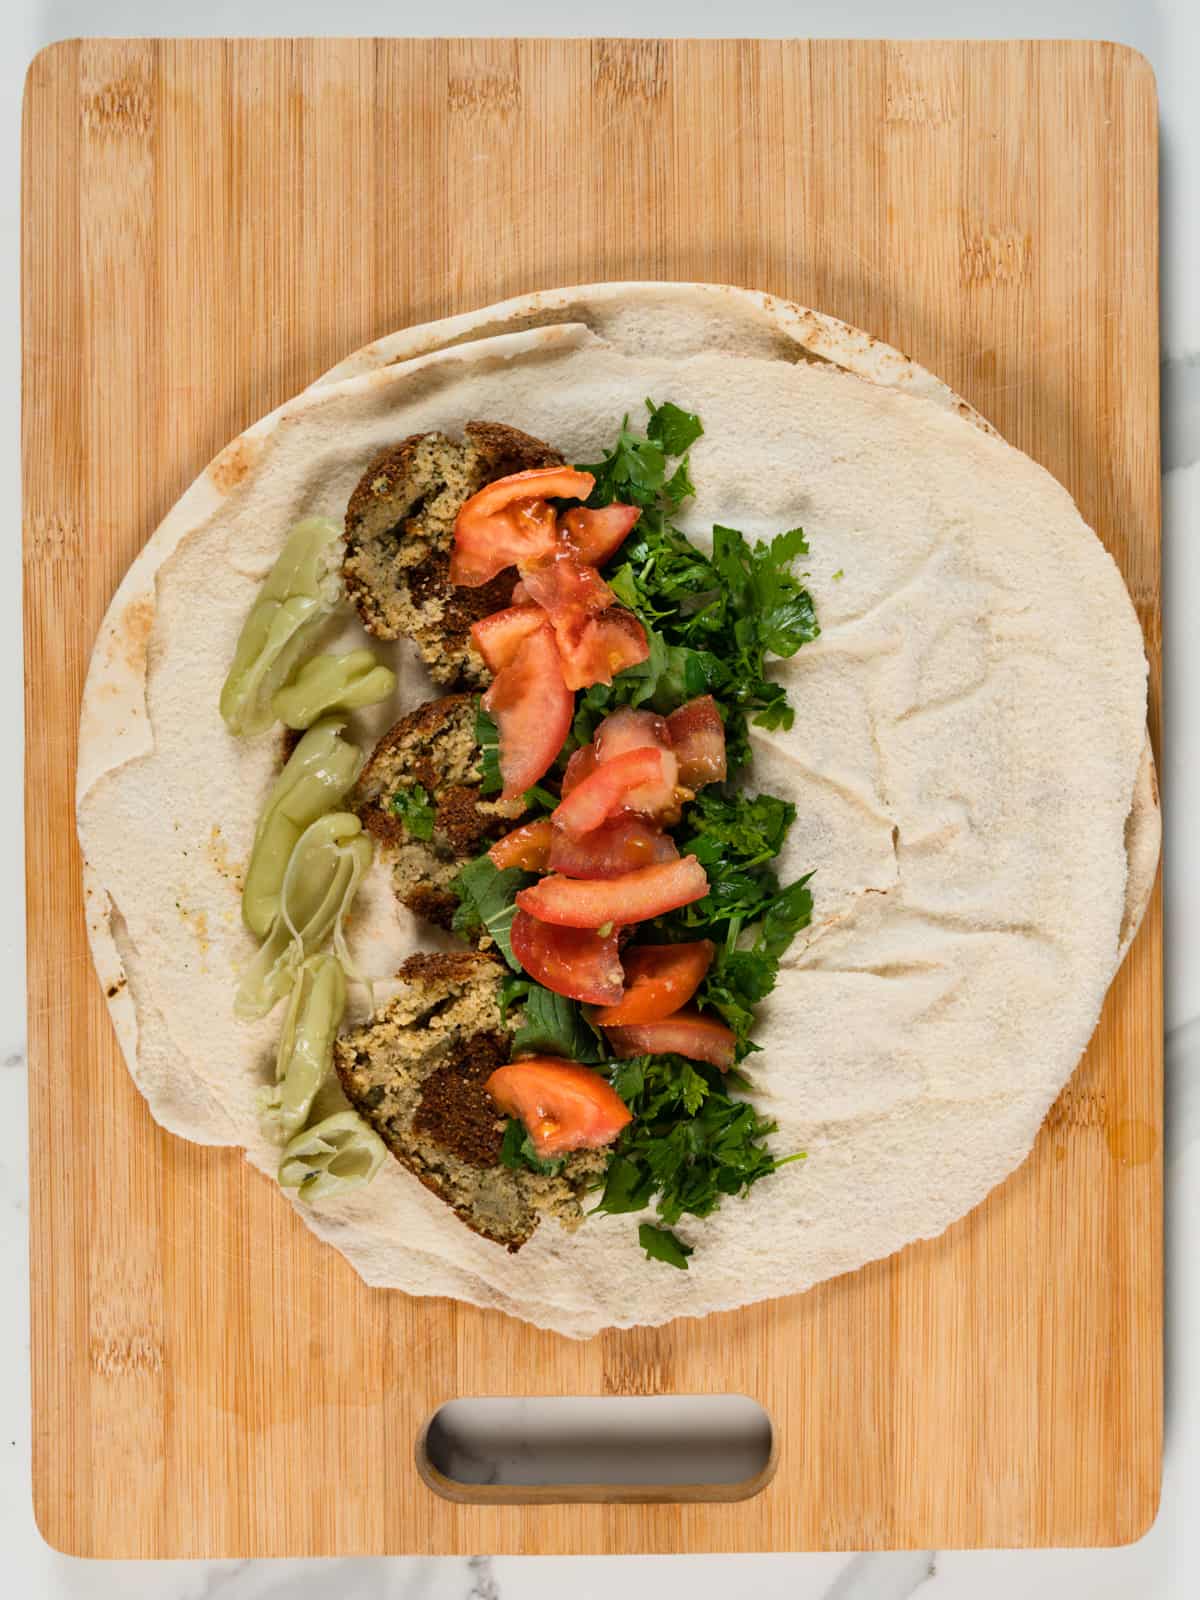 mint and parsley leaves with green pickled chillis, chopped tomatoes in a round pita bread with squashed falafel